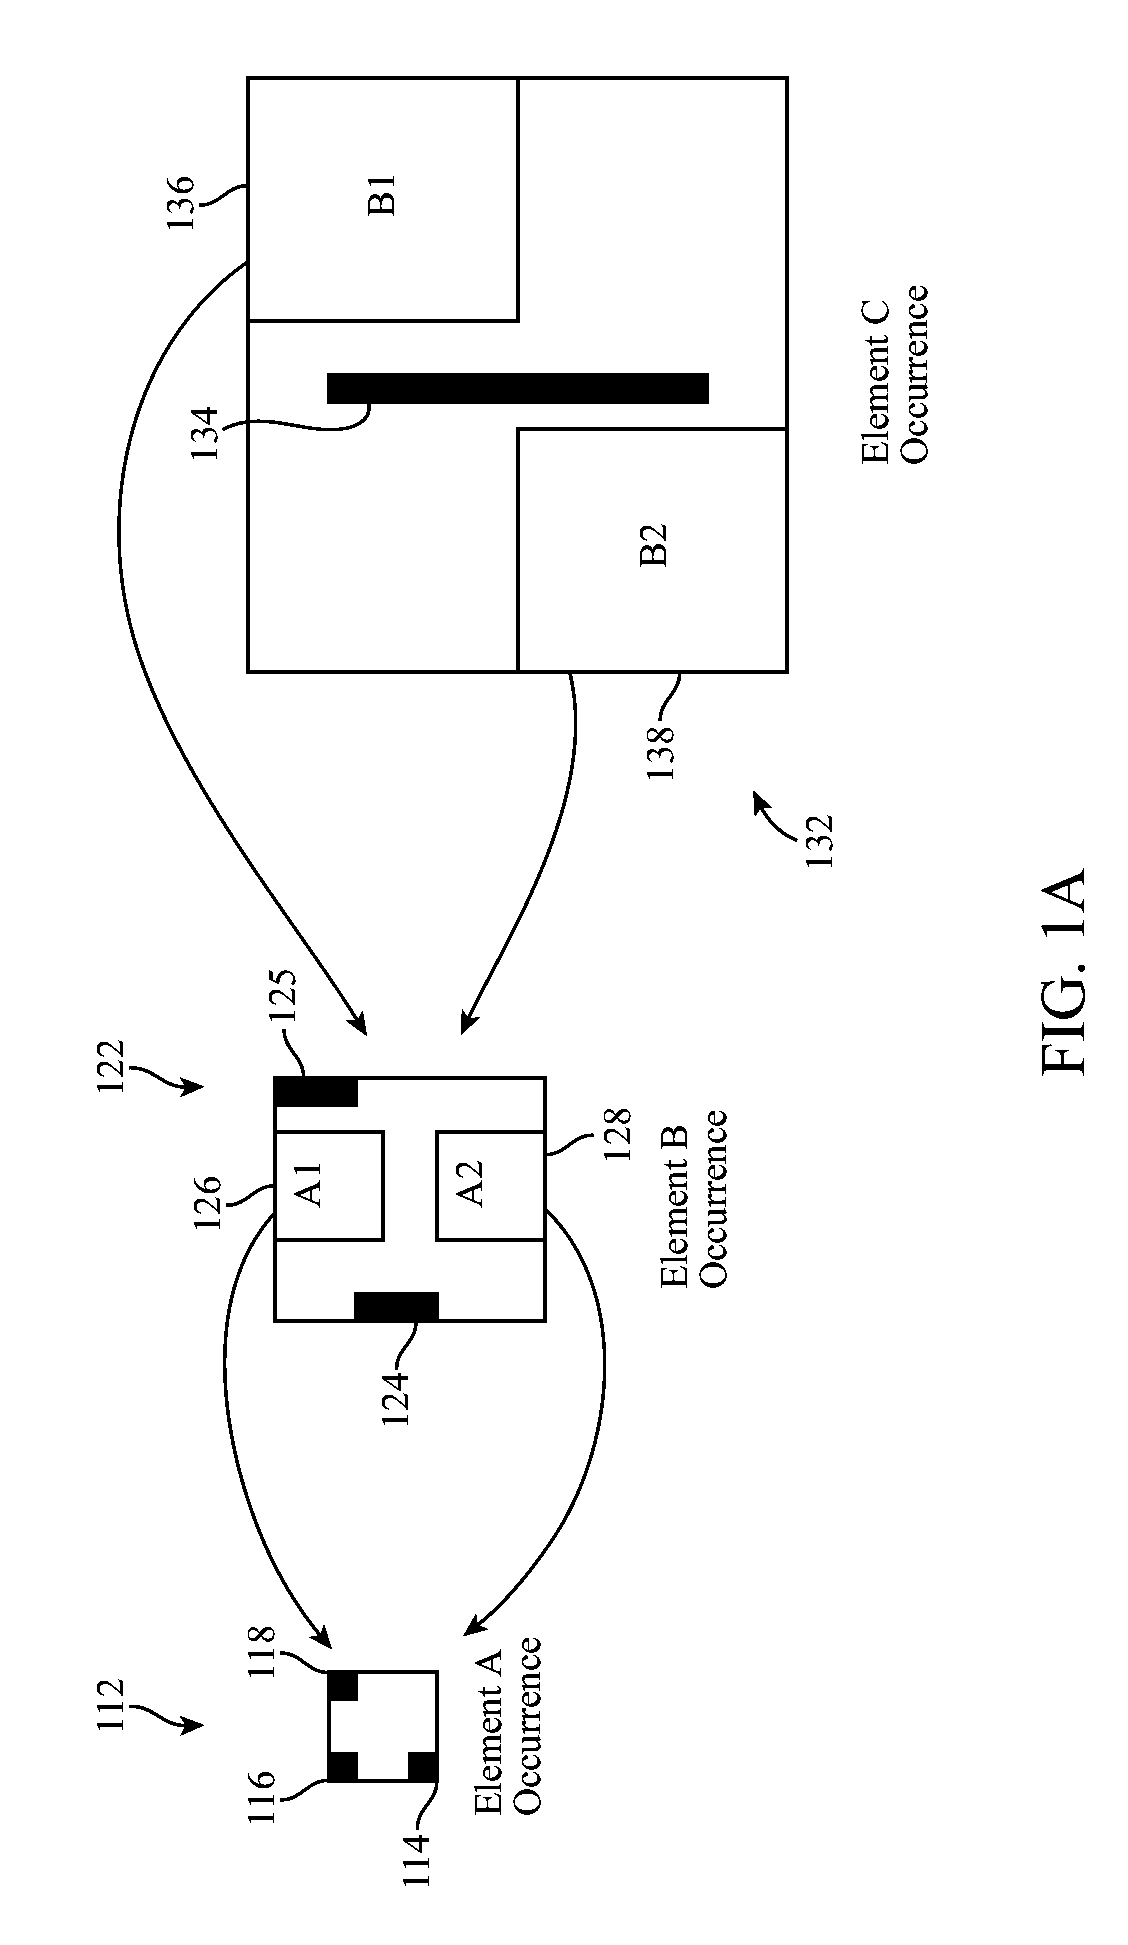 Method and mechanism for identifying and tracking shape connectivity